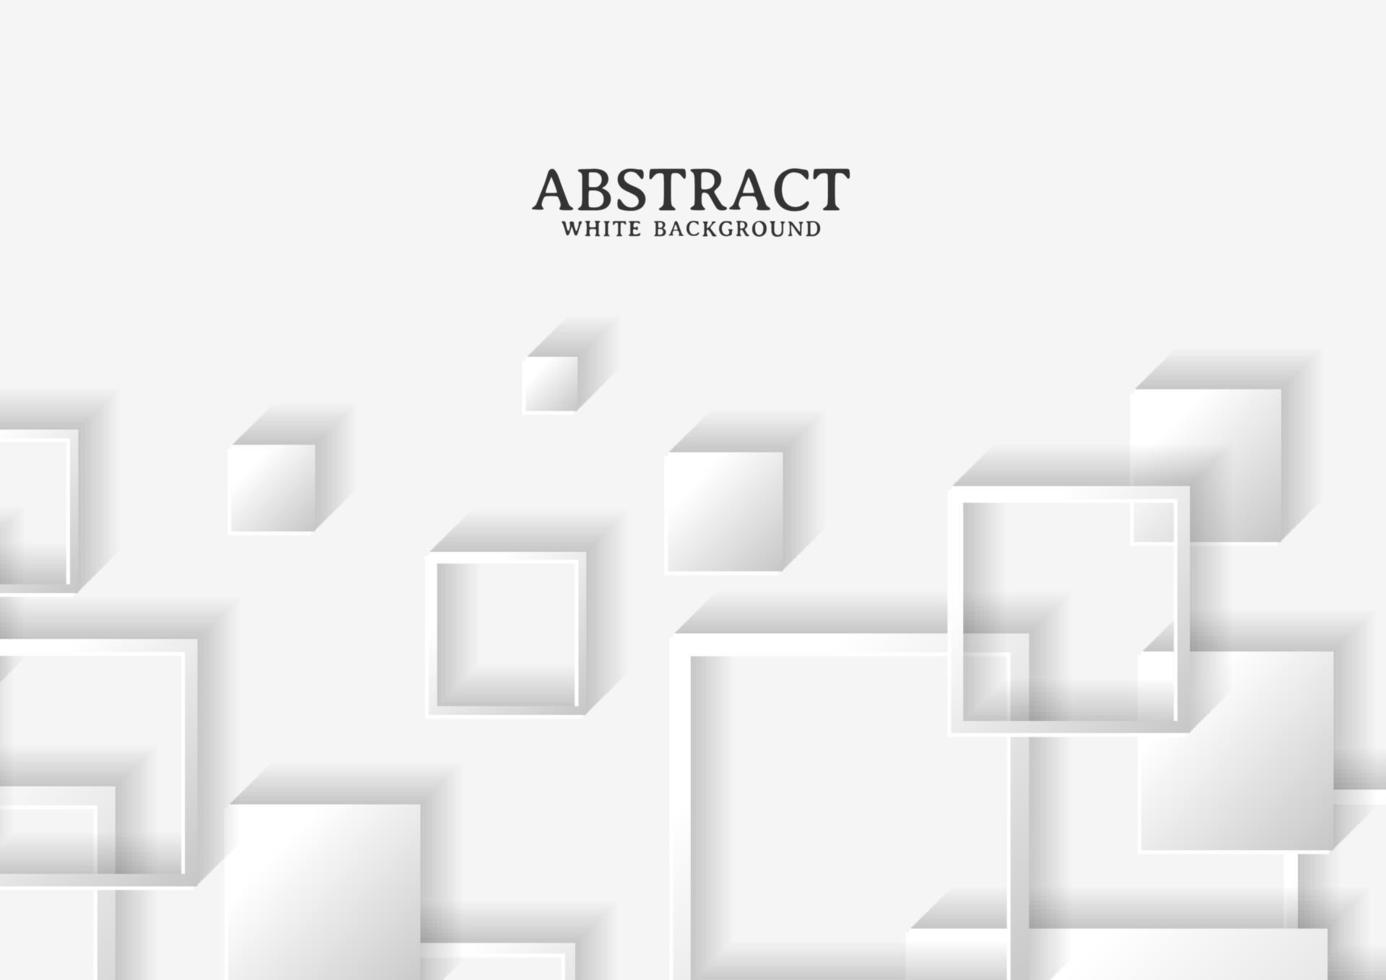 Abstract white and grey square background texture vector